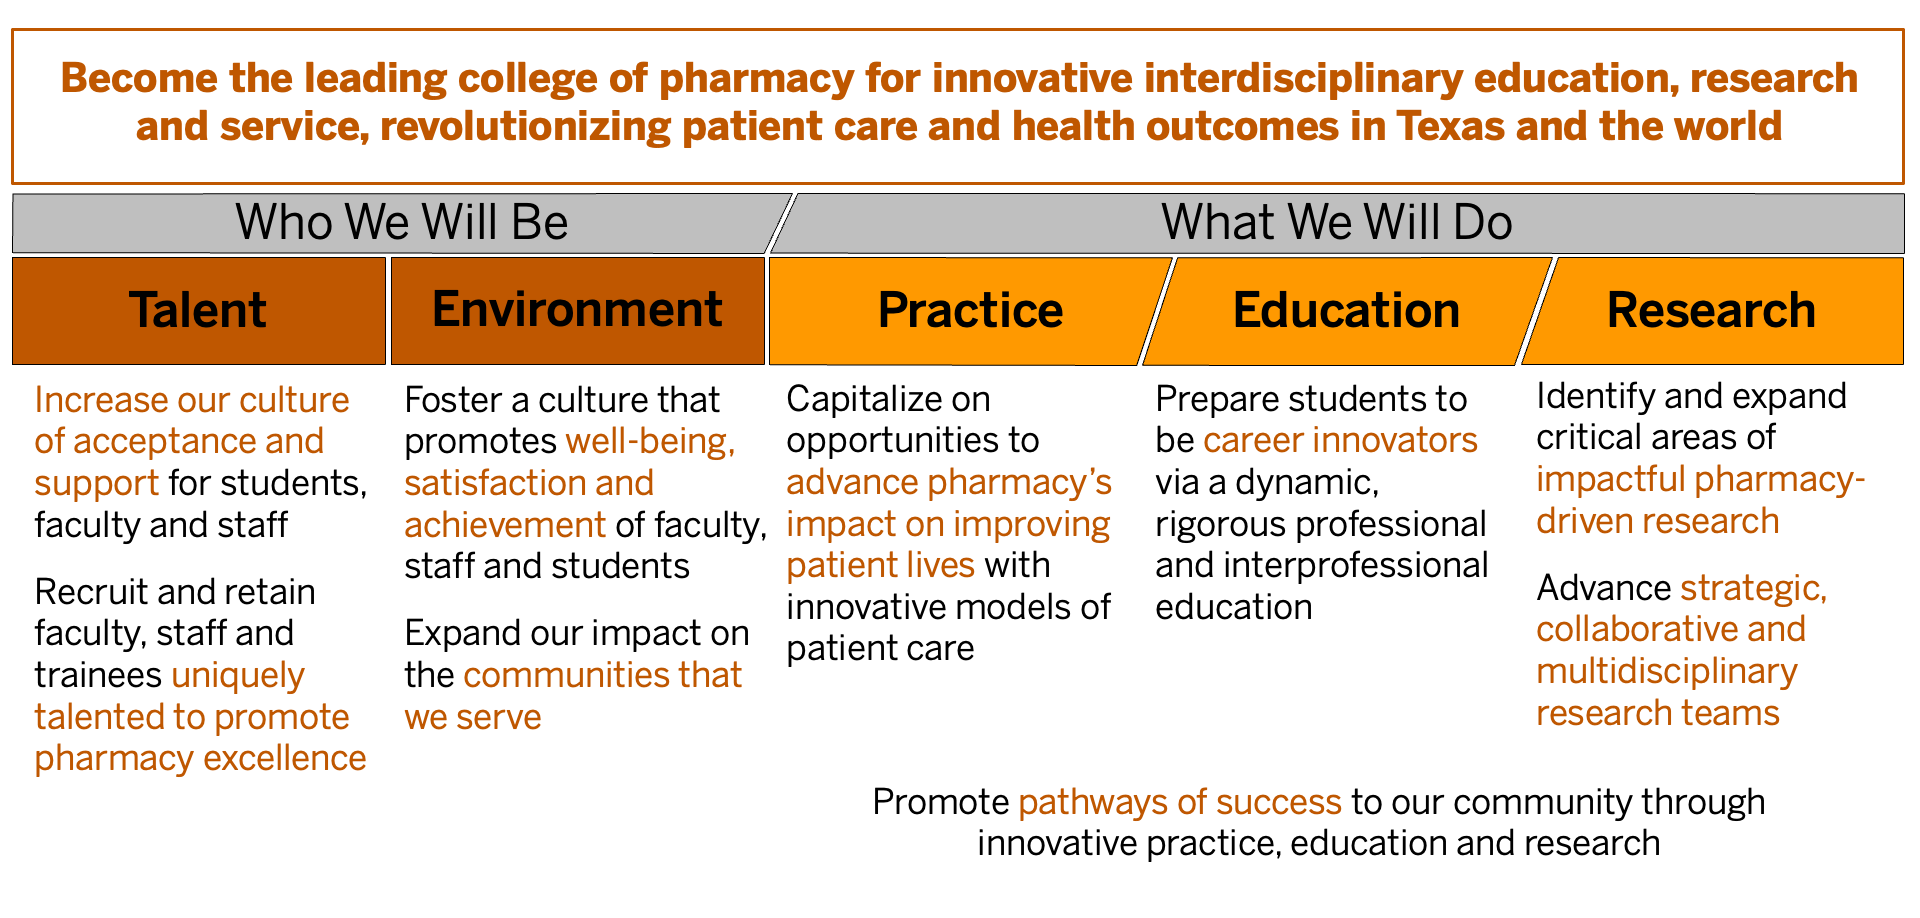 Pharmacy strategic plan infographic; full text is transcribed on linked page